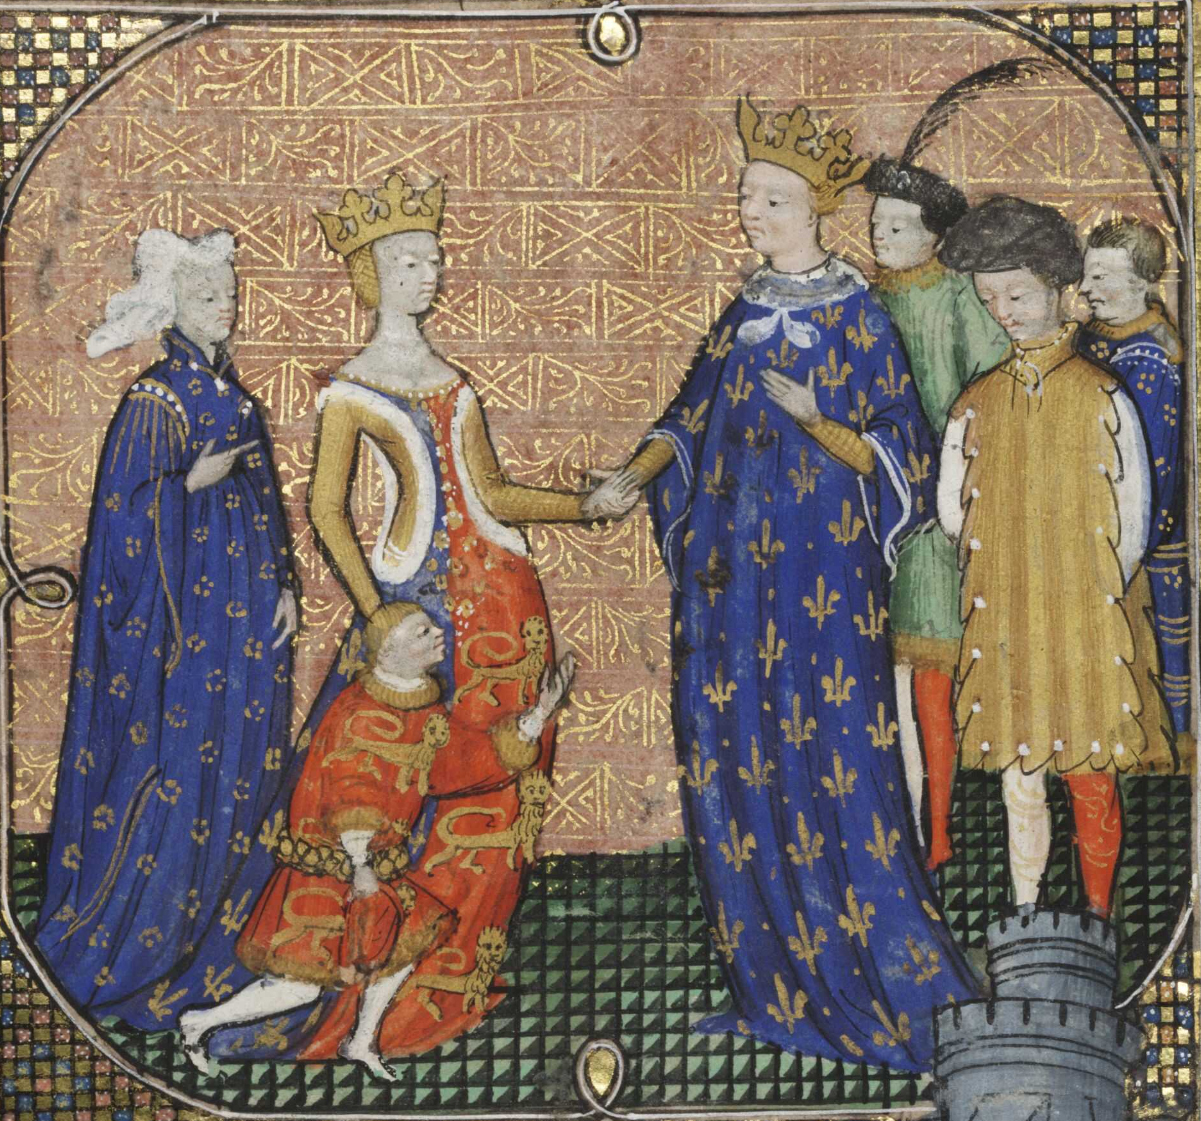 Painting of Edward III giving homage